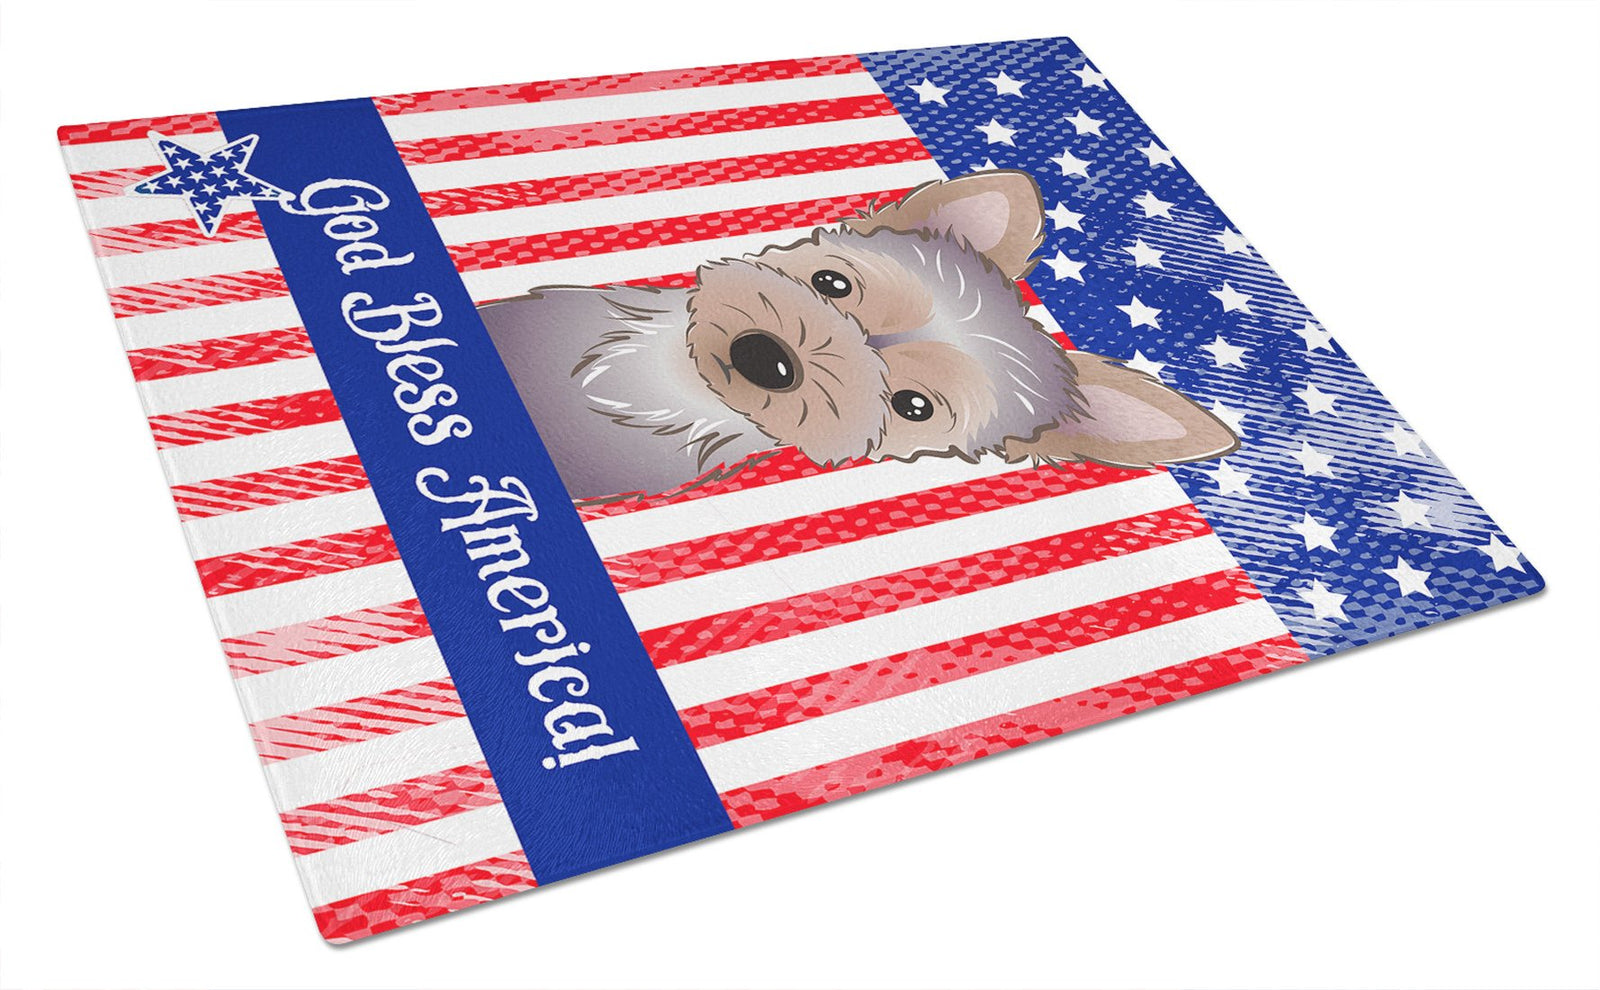 God Bless American Flag with Yorkie Puppy Glass Cutting Board Large BB2162LCB by Caroline's Treasures